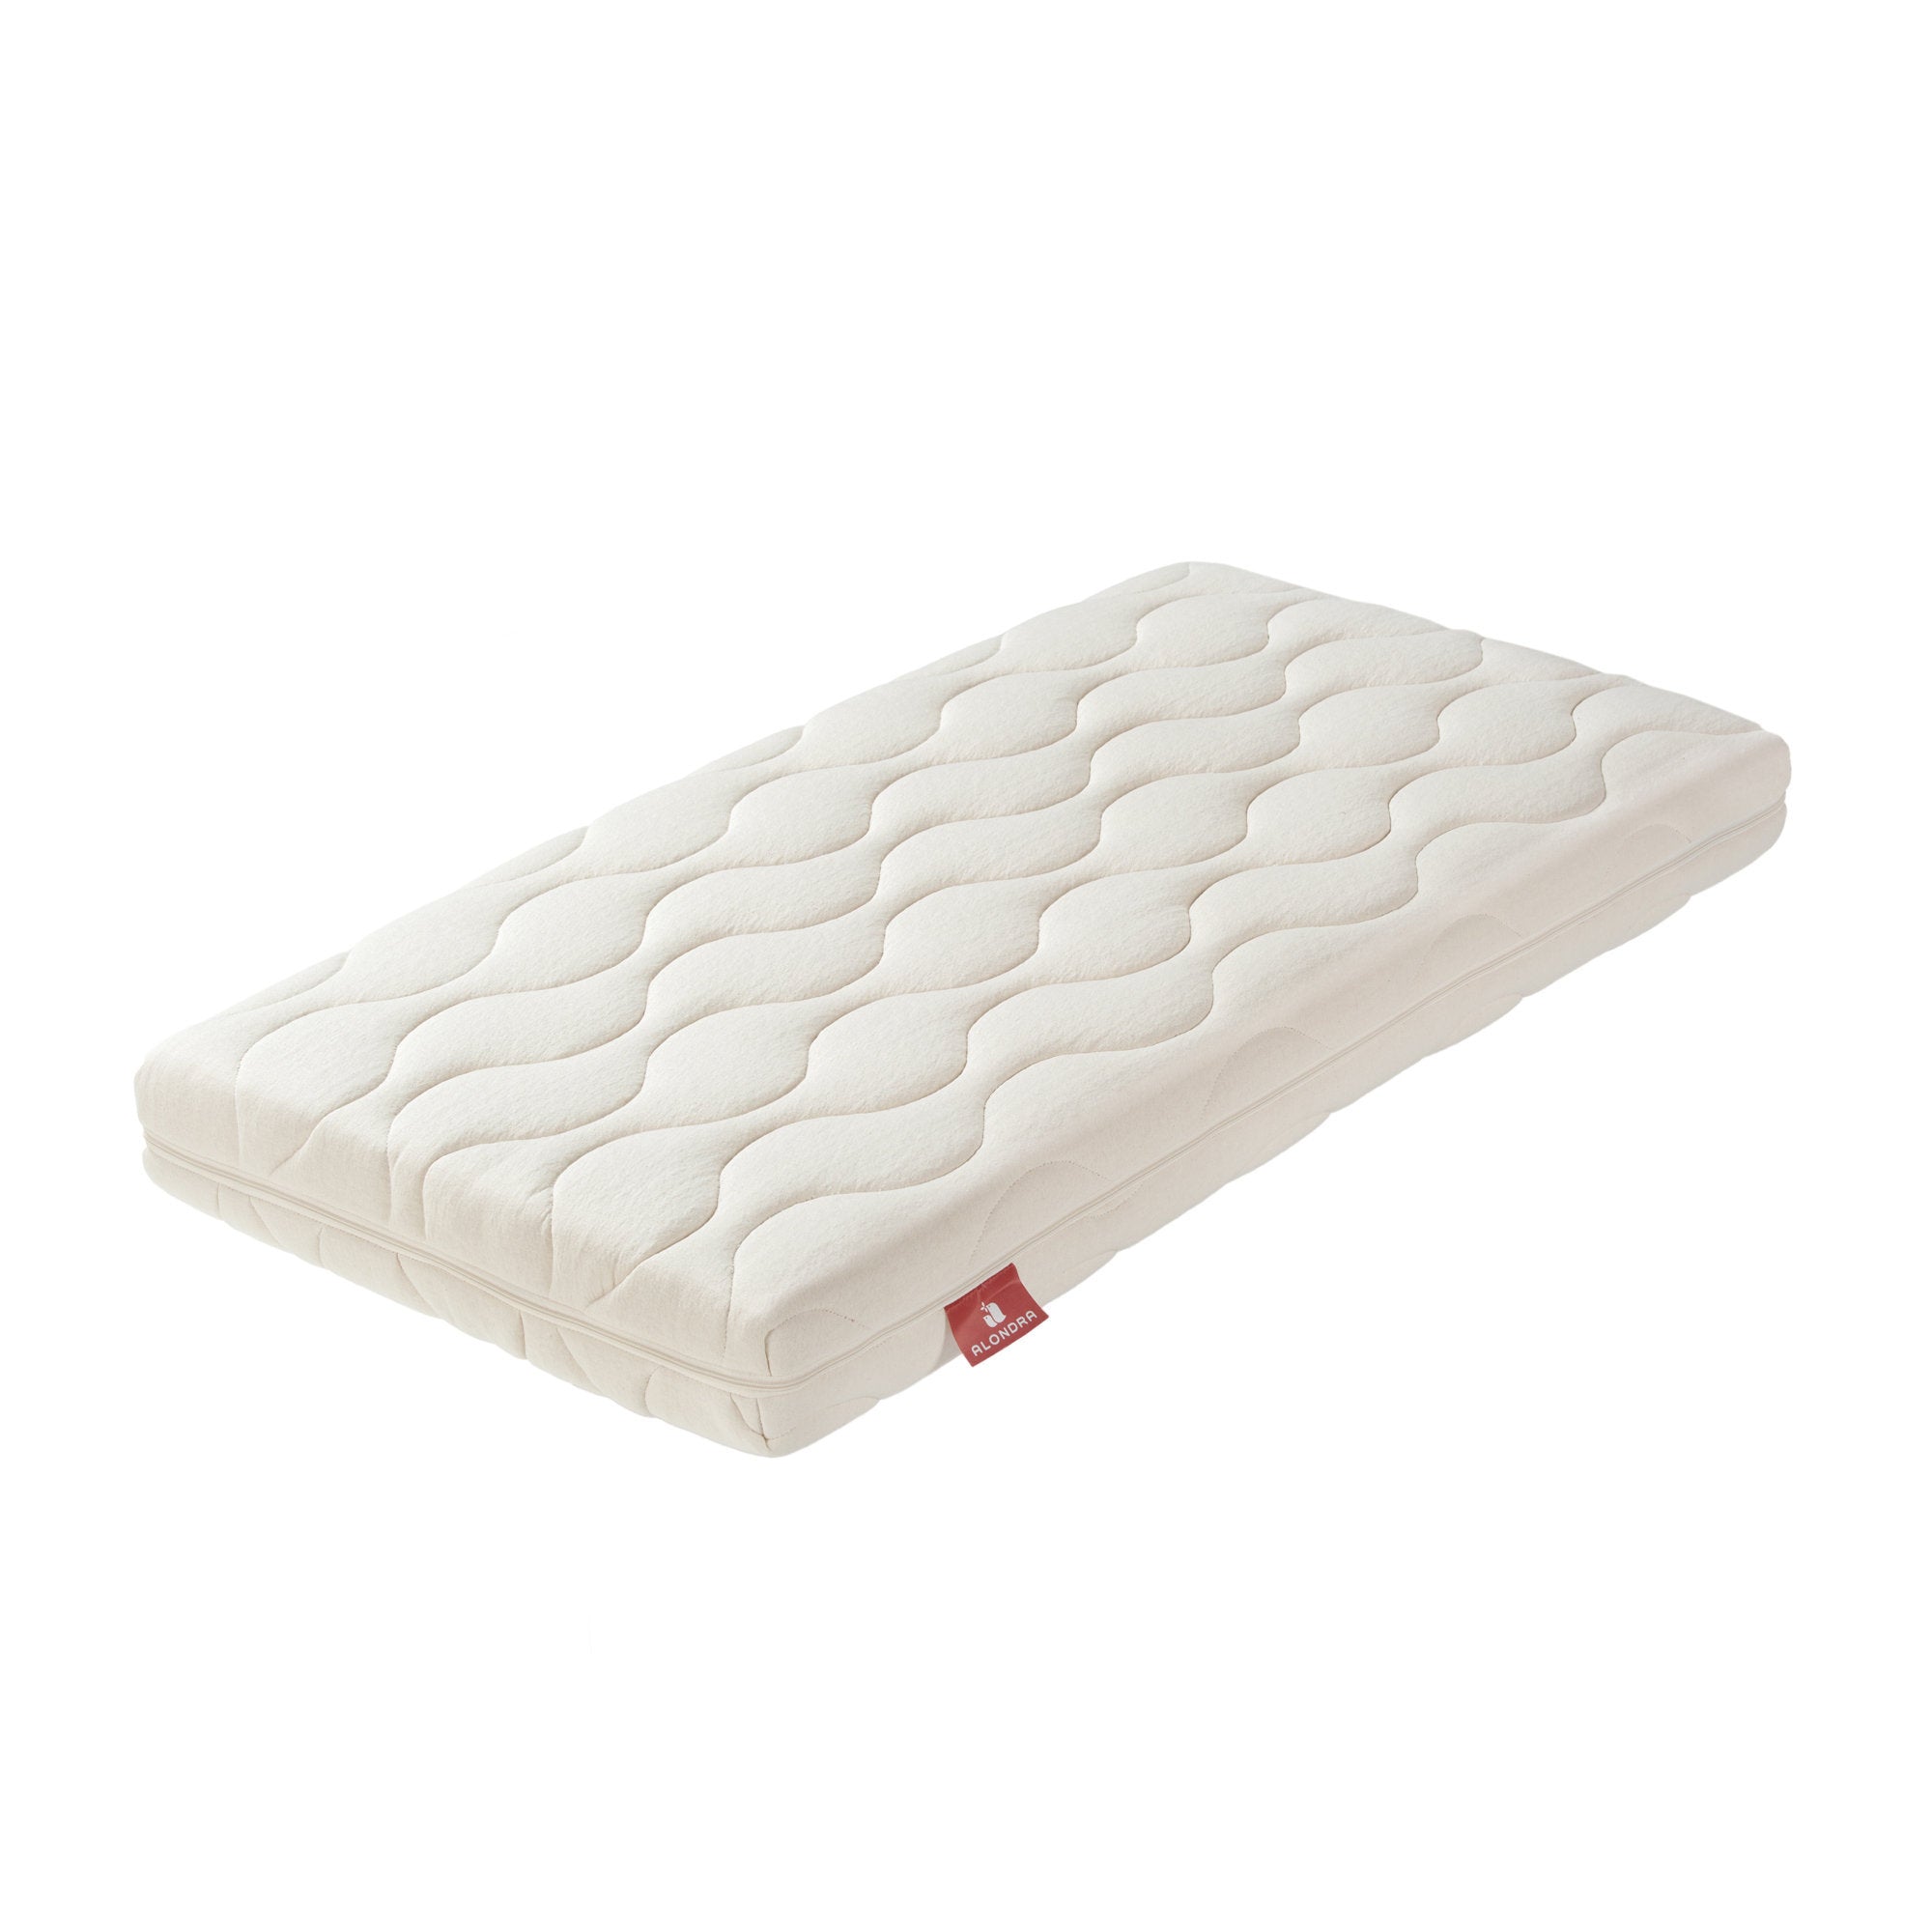 Baby cot mattress recommended by pediatricians - Alondra